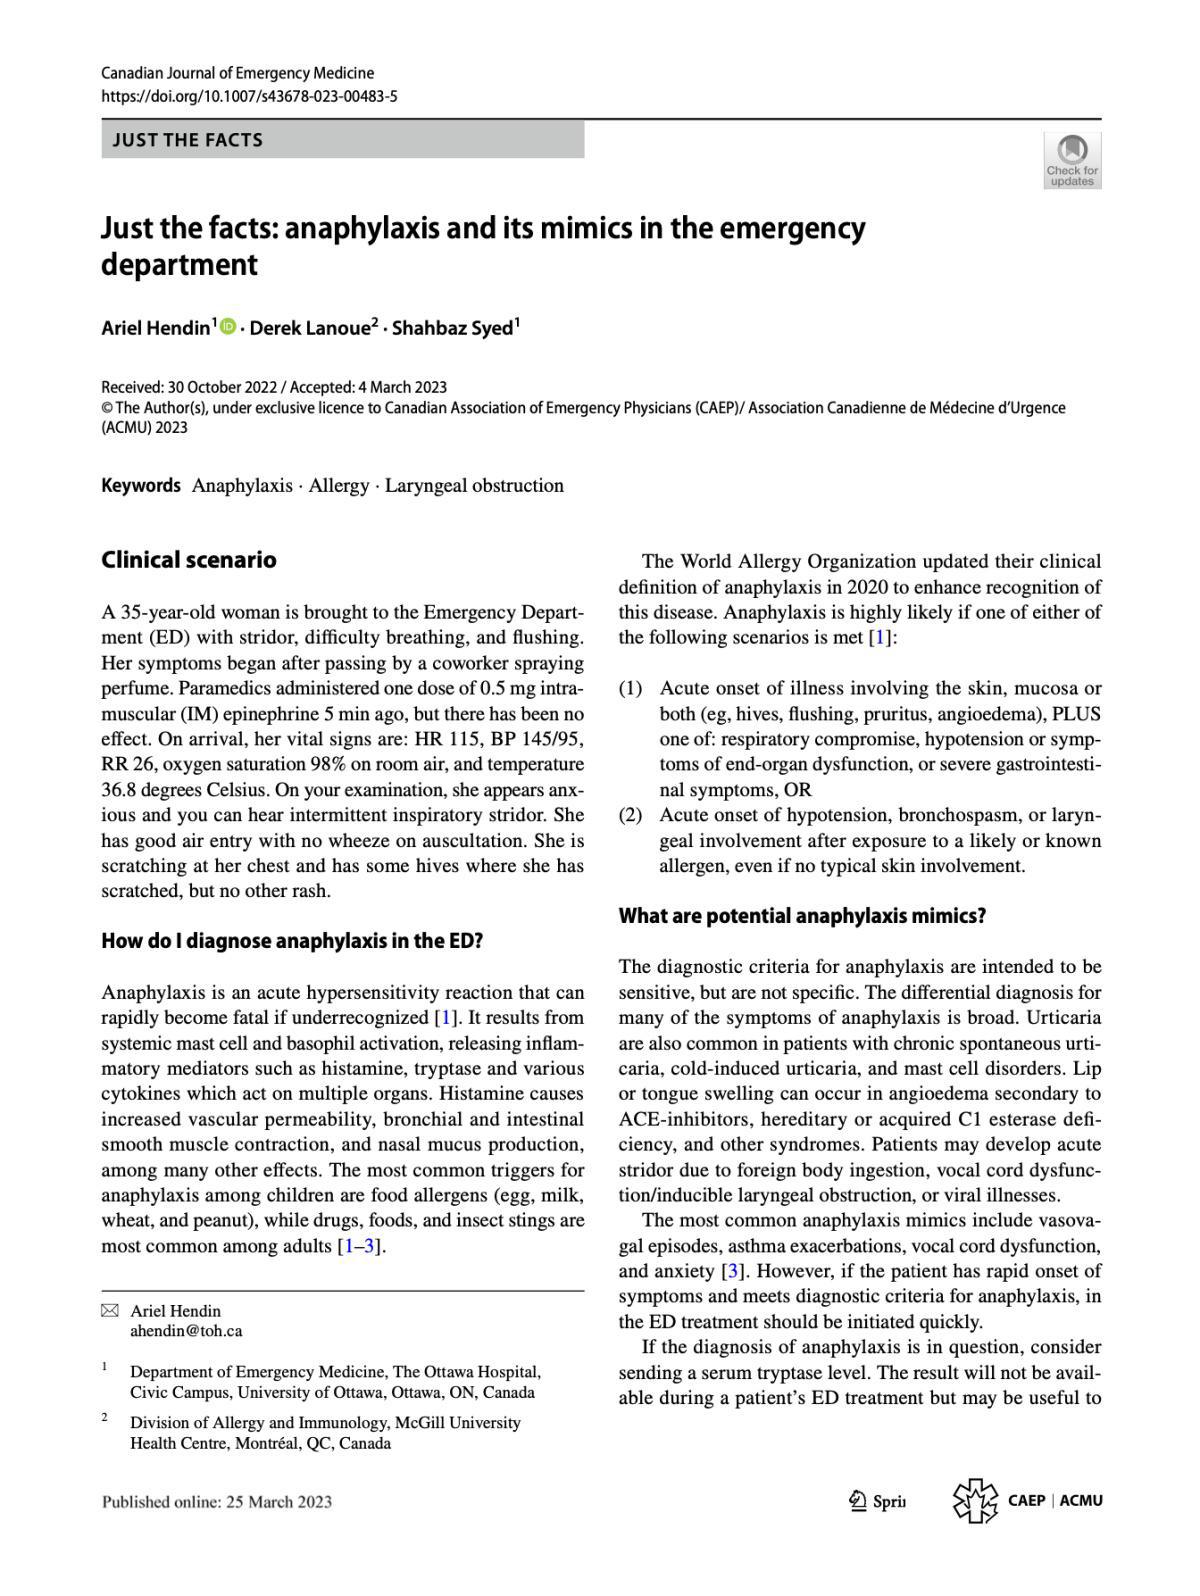 Just the facts: anaphylaxis and its mimics in the emergency department